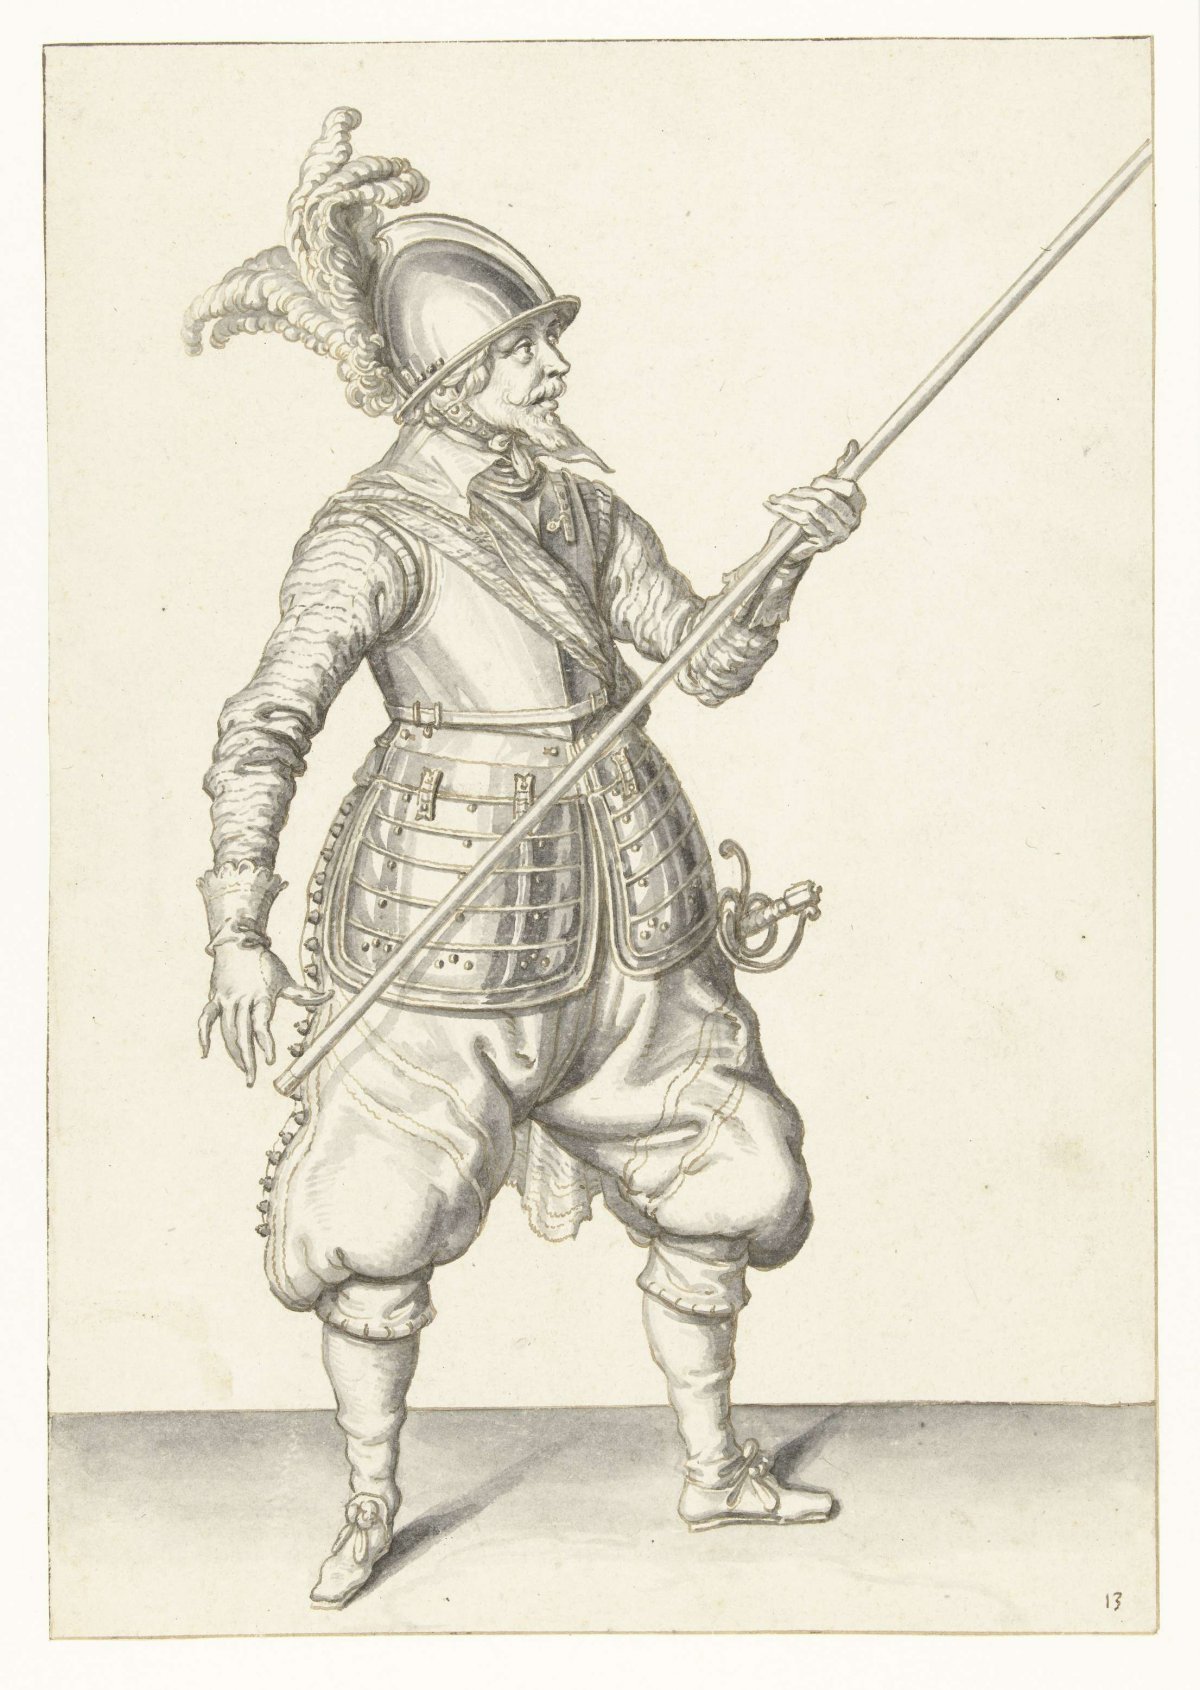 Soldier carrying his spear with his left hand by his right side, the point pointed diagonally upward, Jacques de Gheyn (II), 1596 - 1606